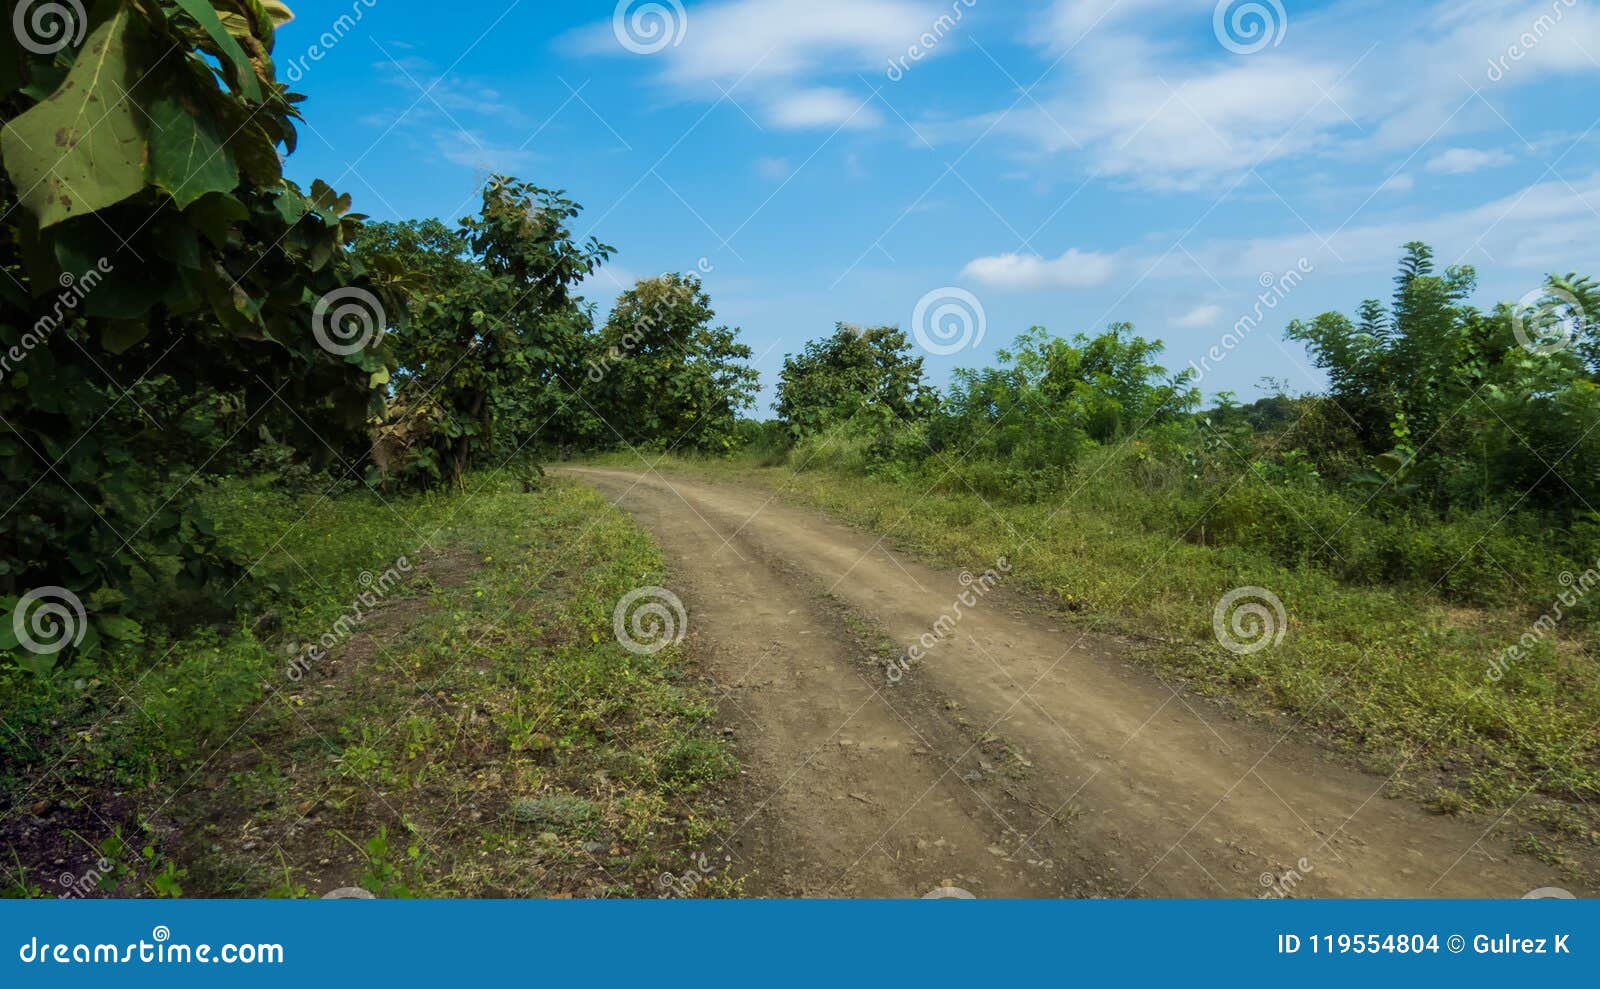 road to the jungle with greenery and blue sky